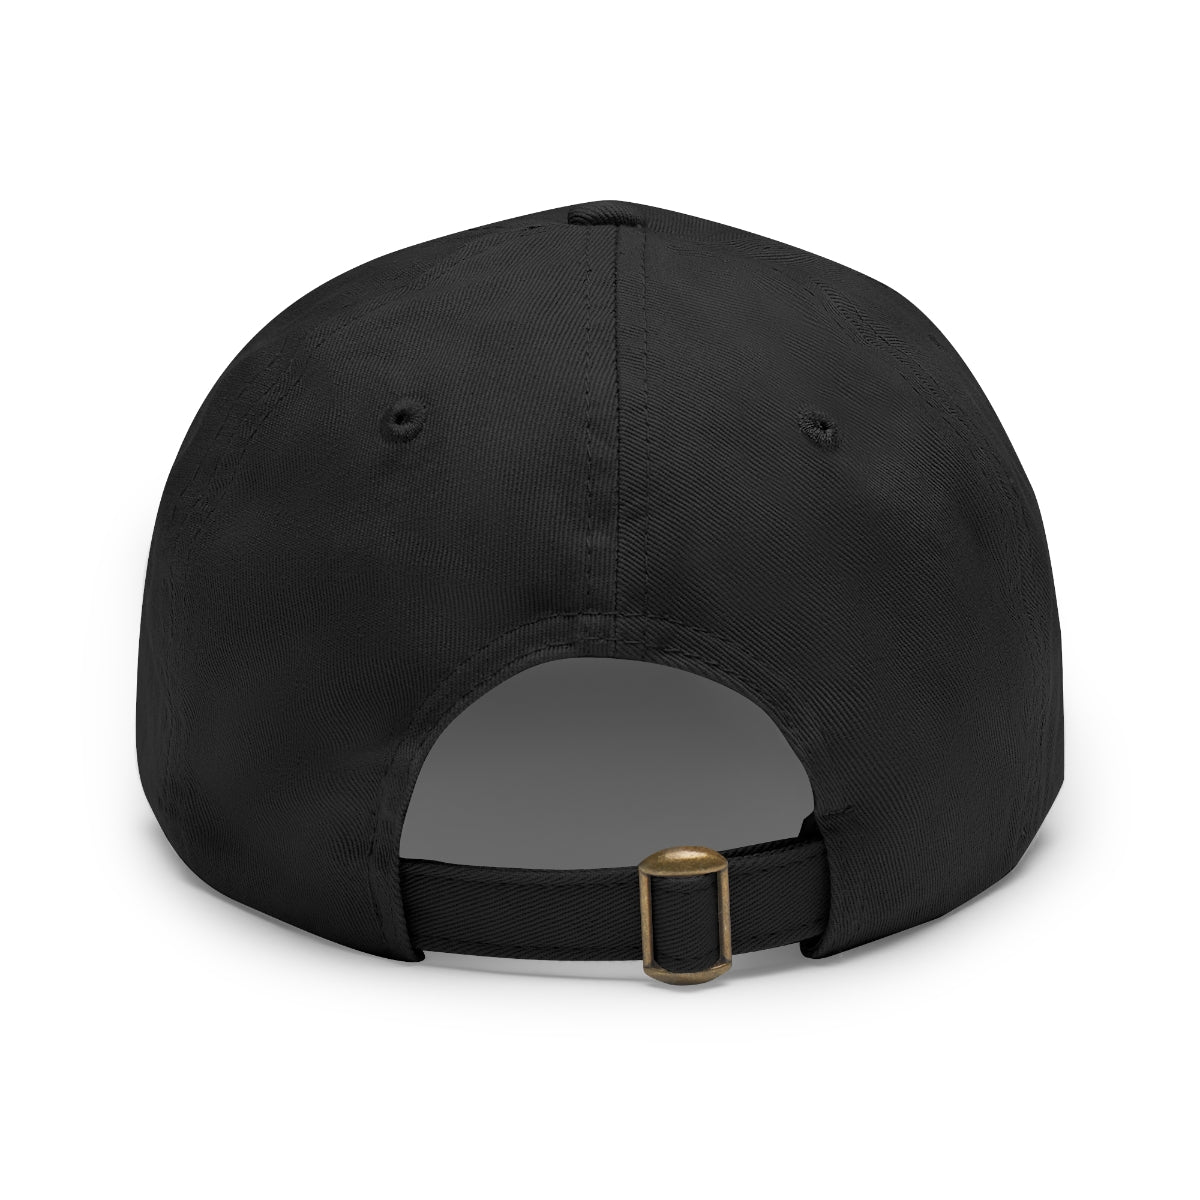 SBT 12 v3 Hat with Leather Patch (Gold)